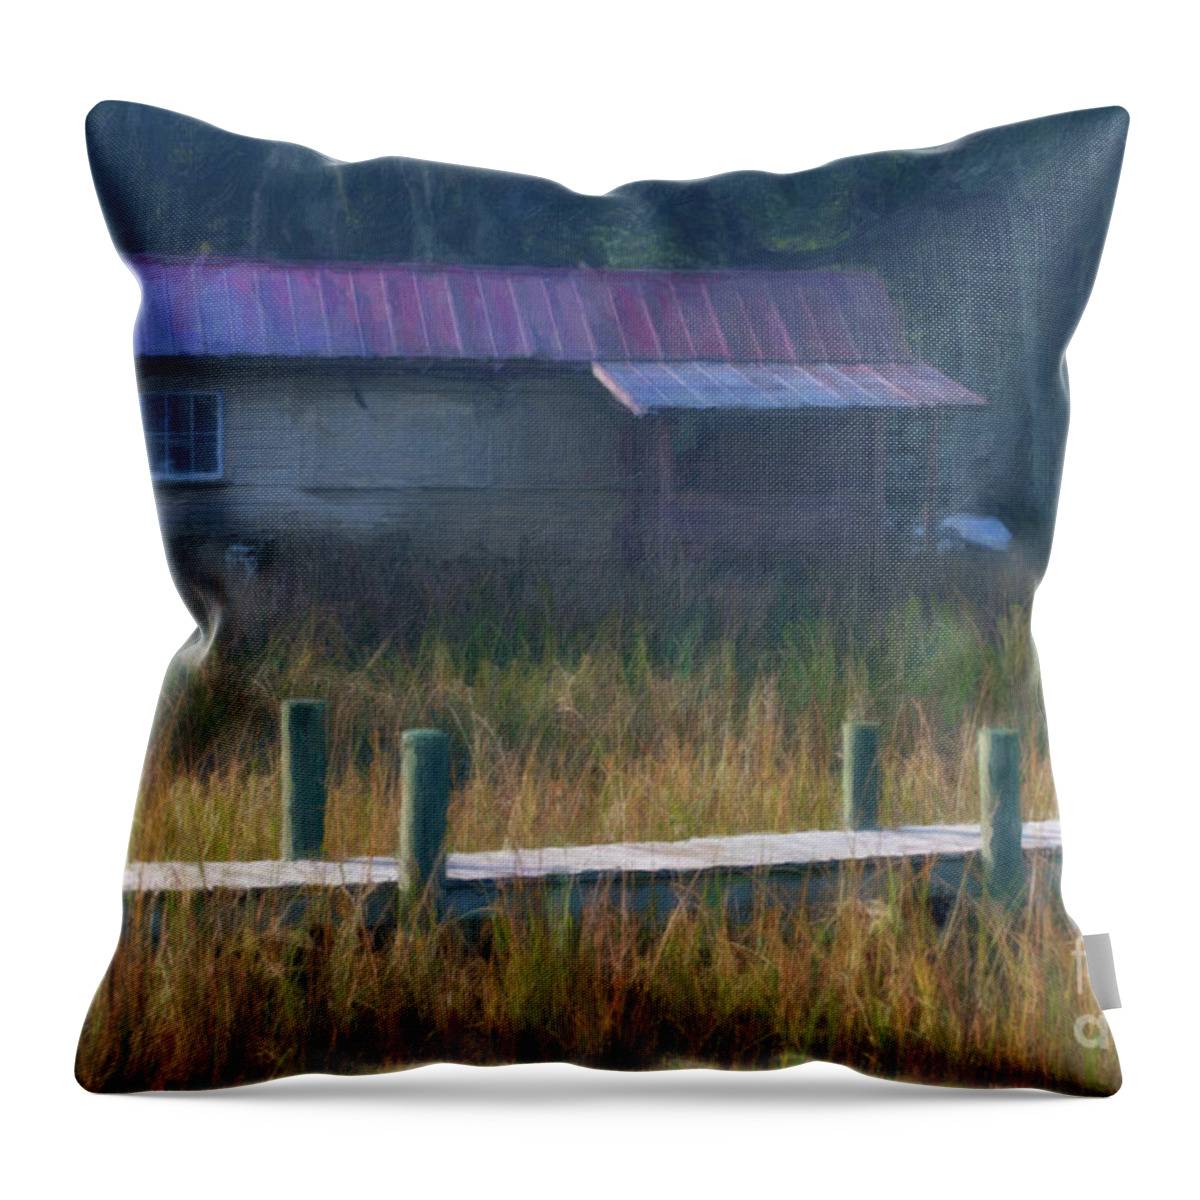 Lowcountry Throw Pillow featuring the photograph Lowcountry Golden Marsh Grass Hues of Gold by Dale Powell